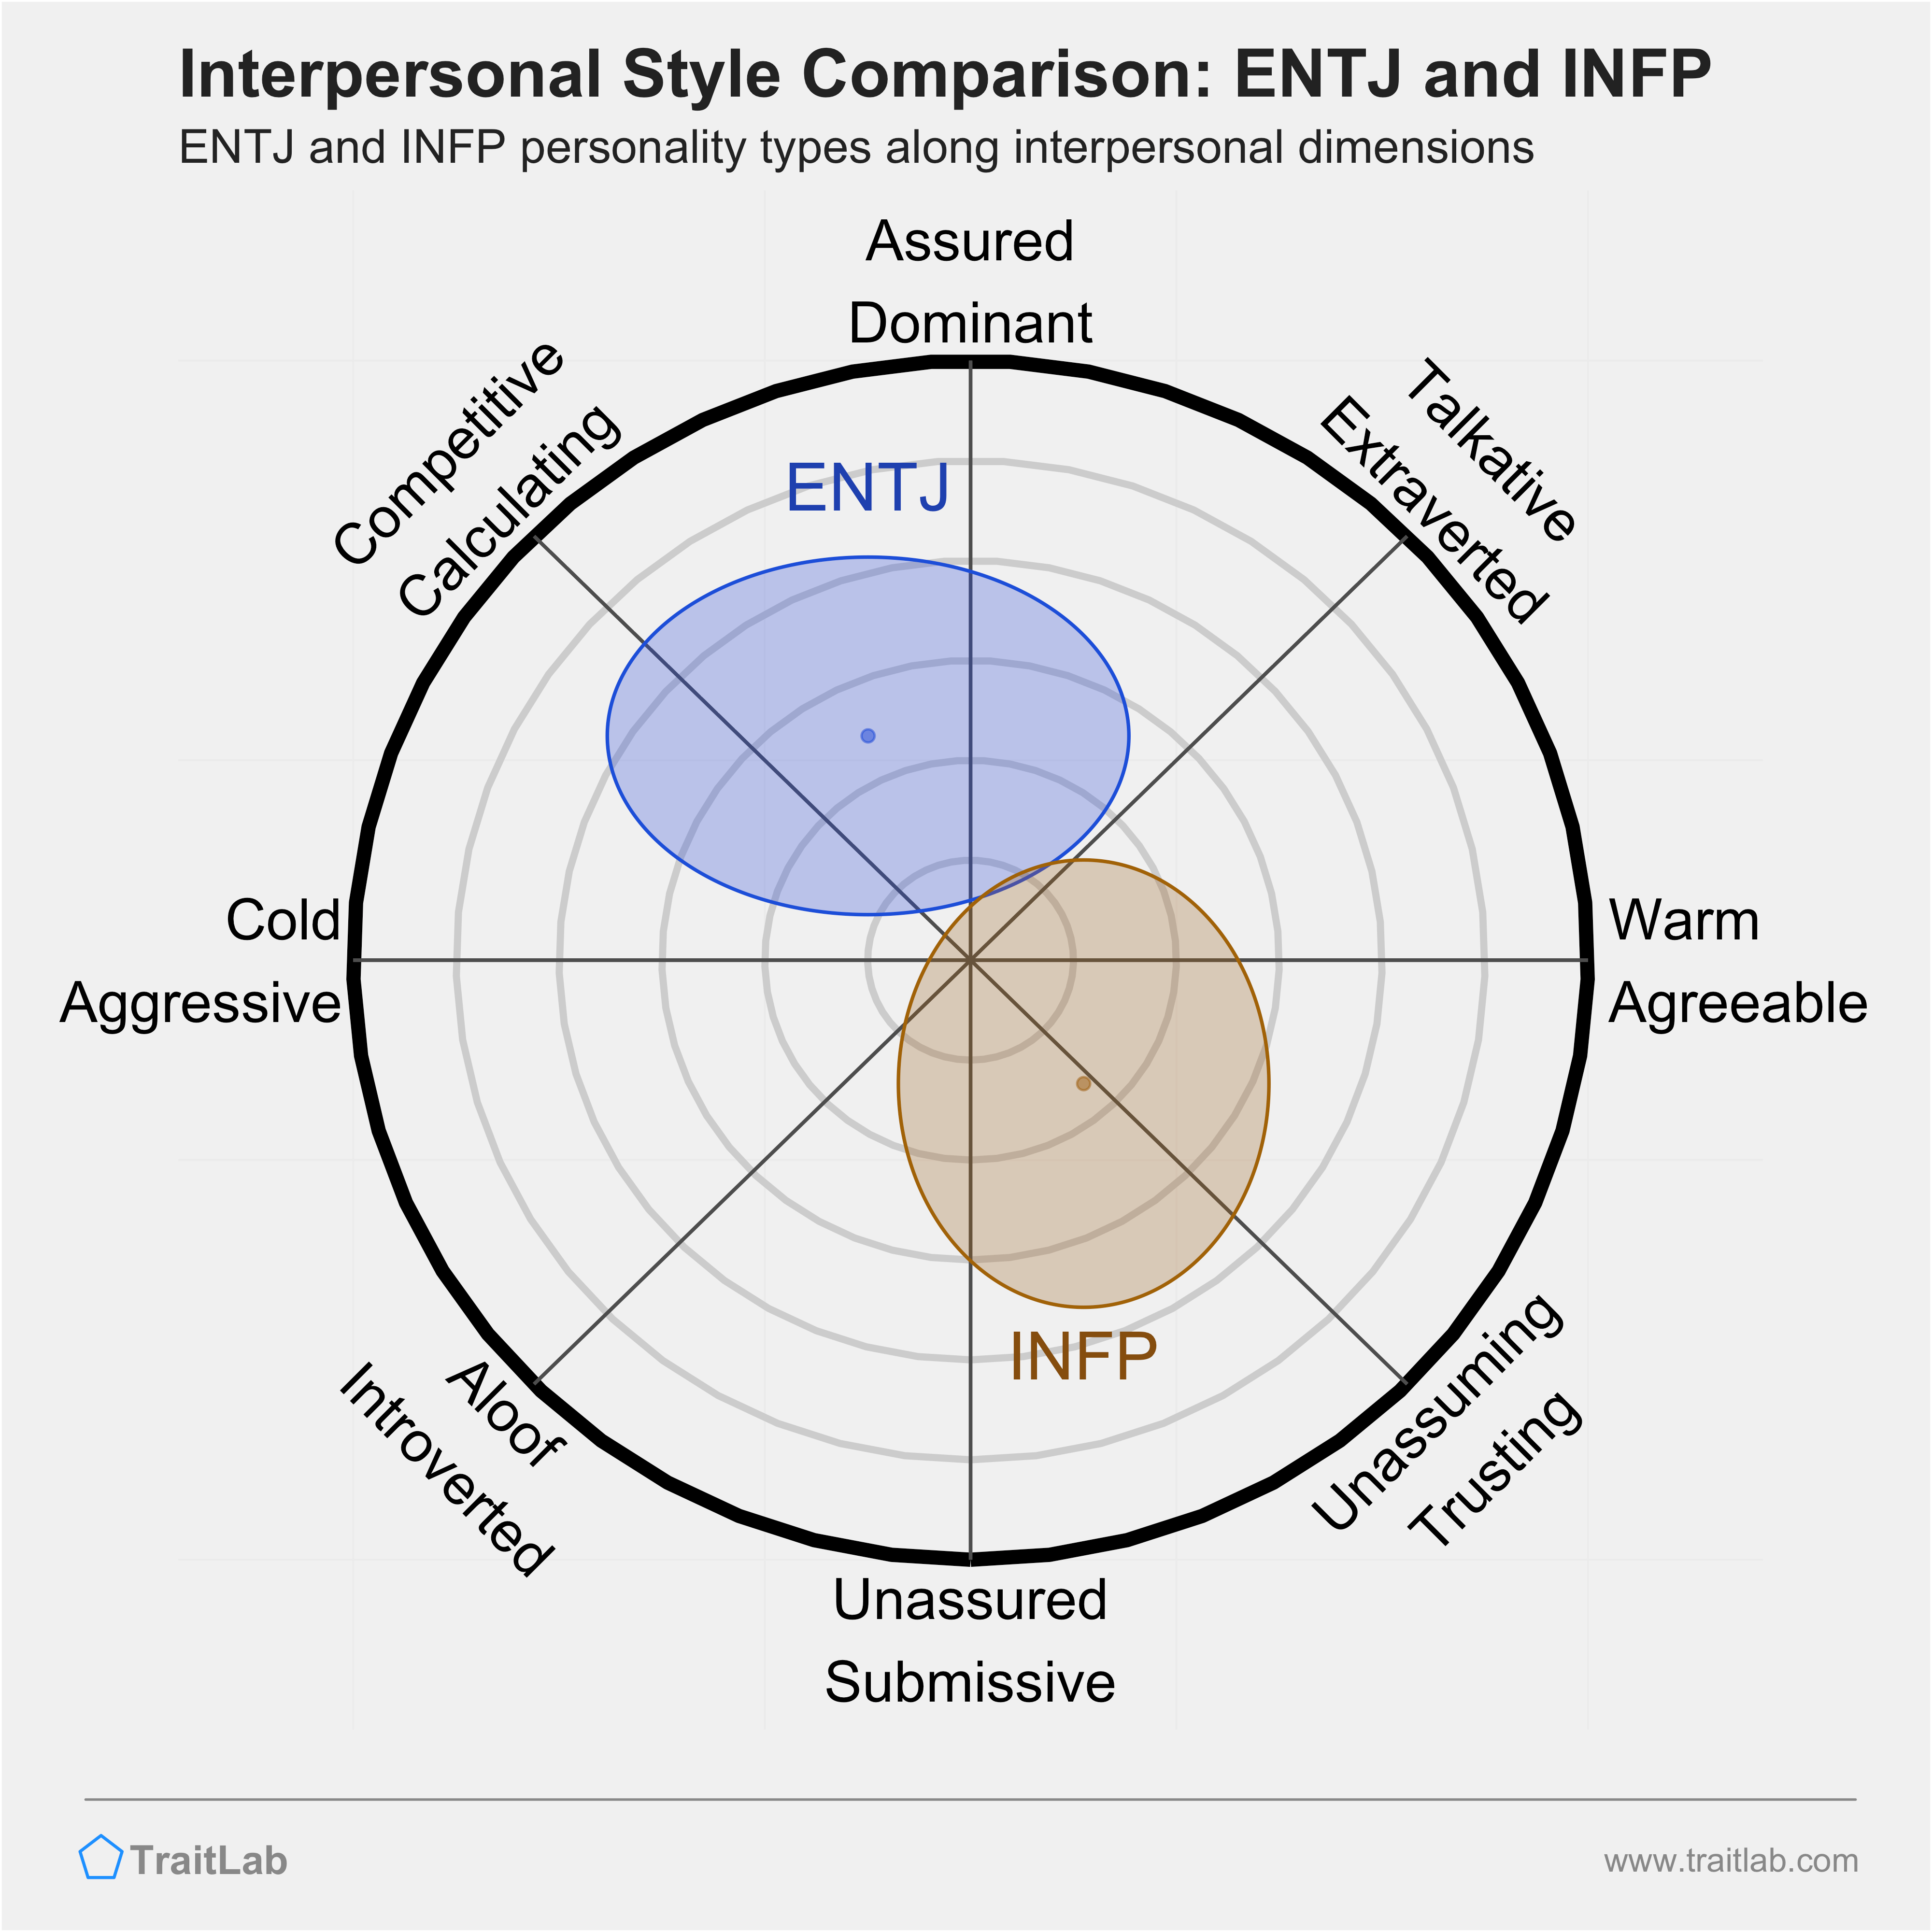 ENTJ and INFP comparison across interpersonal dimensions